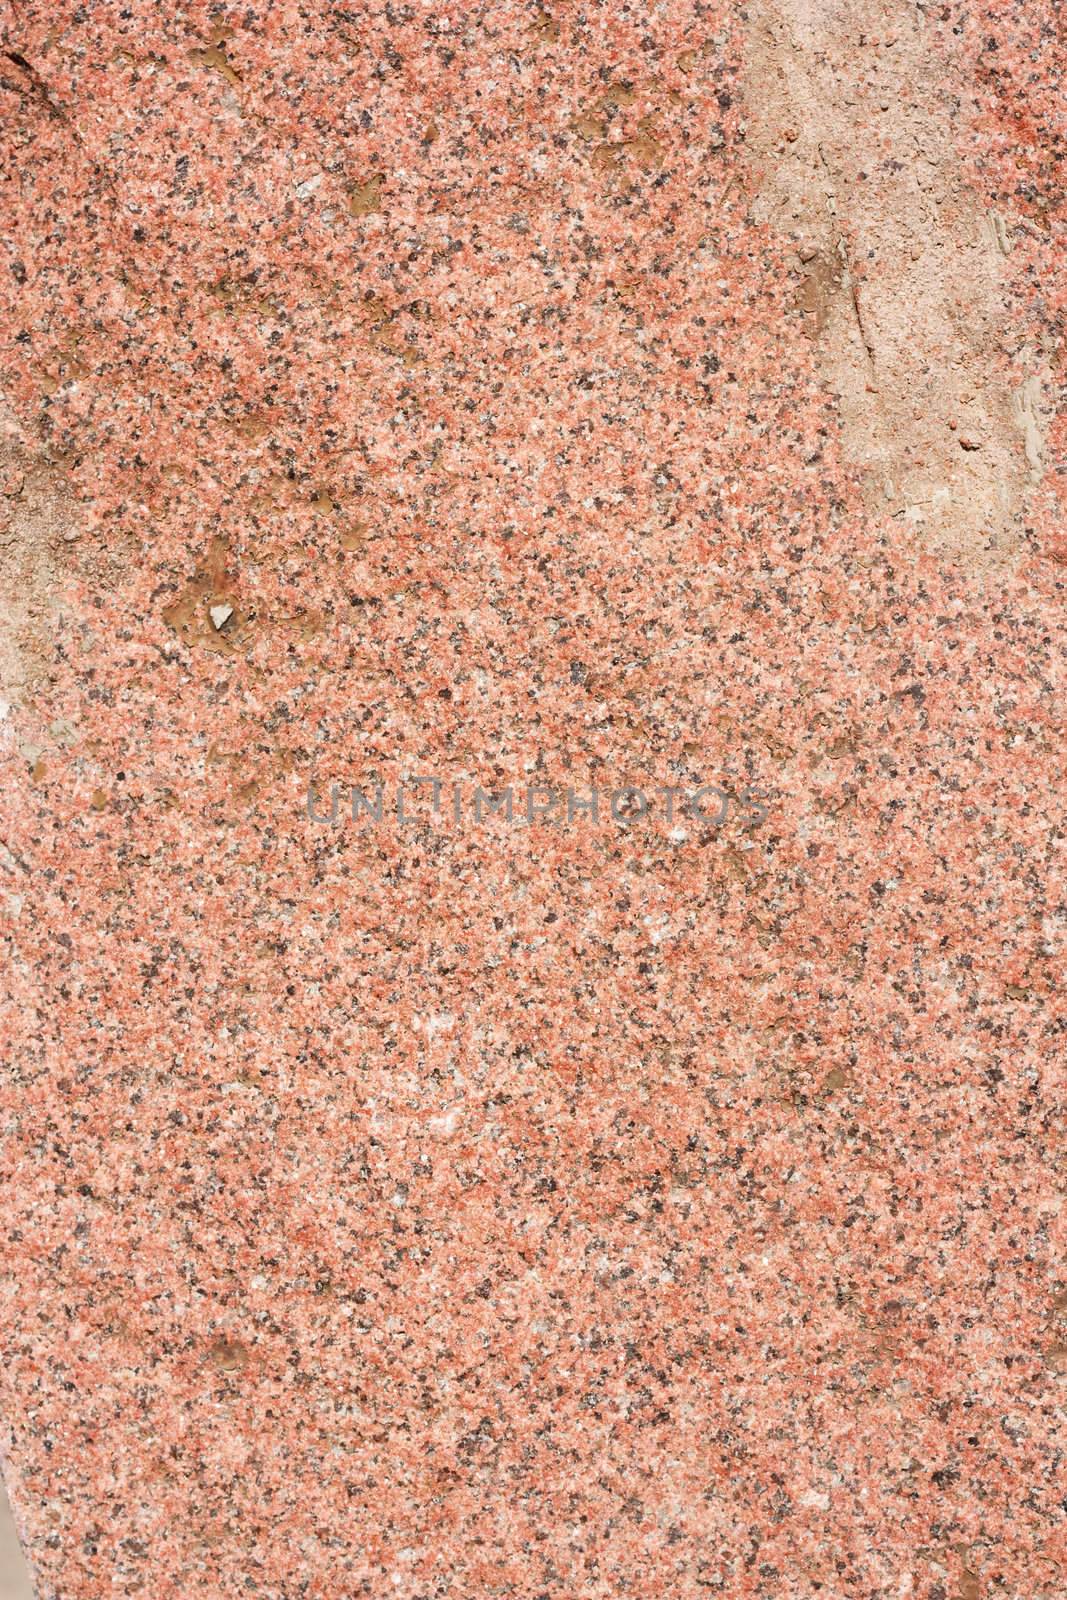 A granite or marble surface for decorative works  by schankz